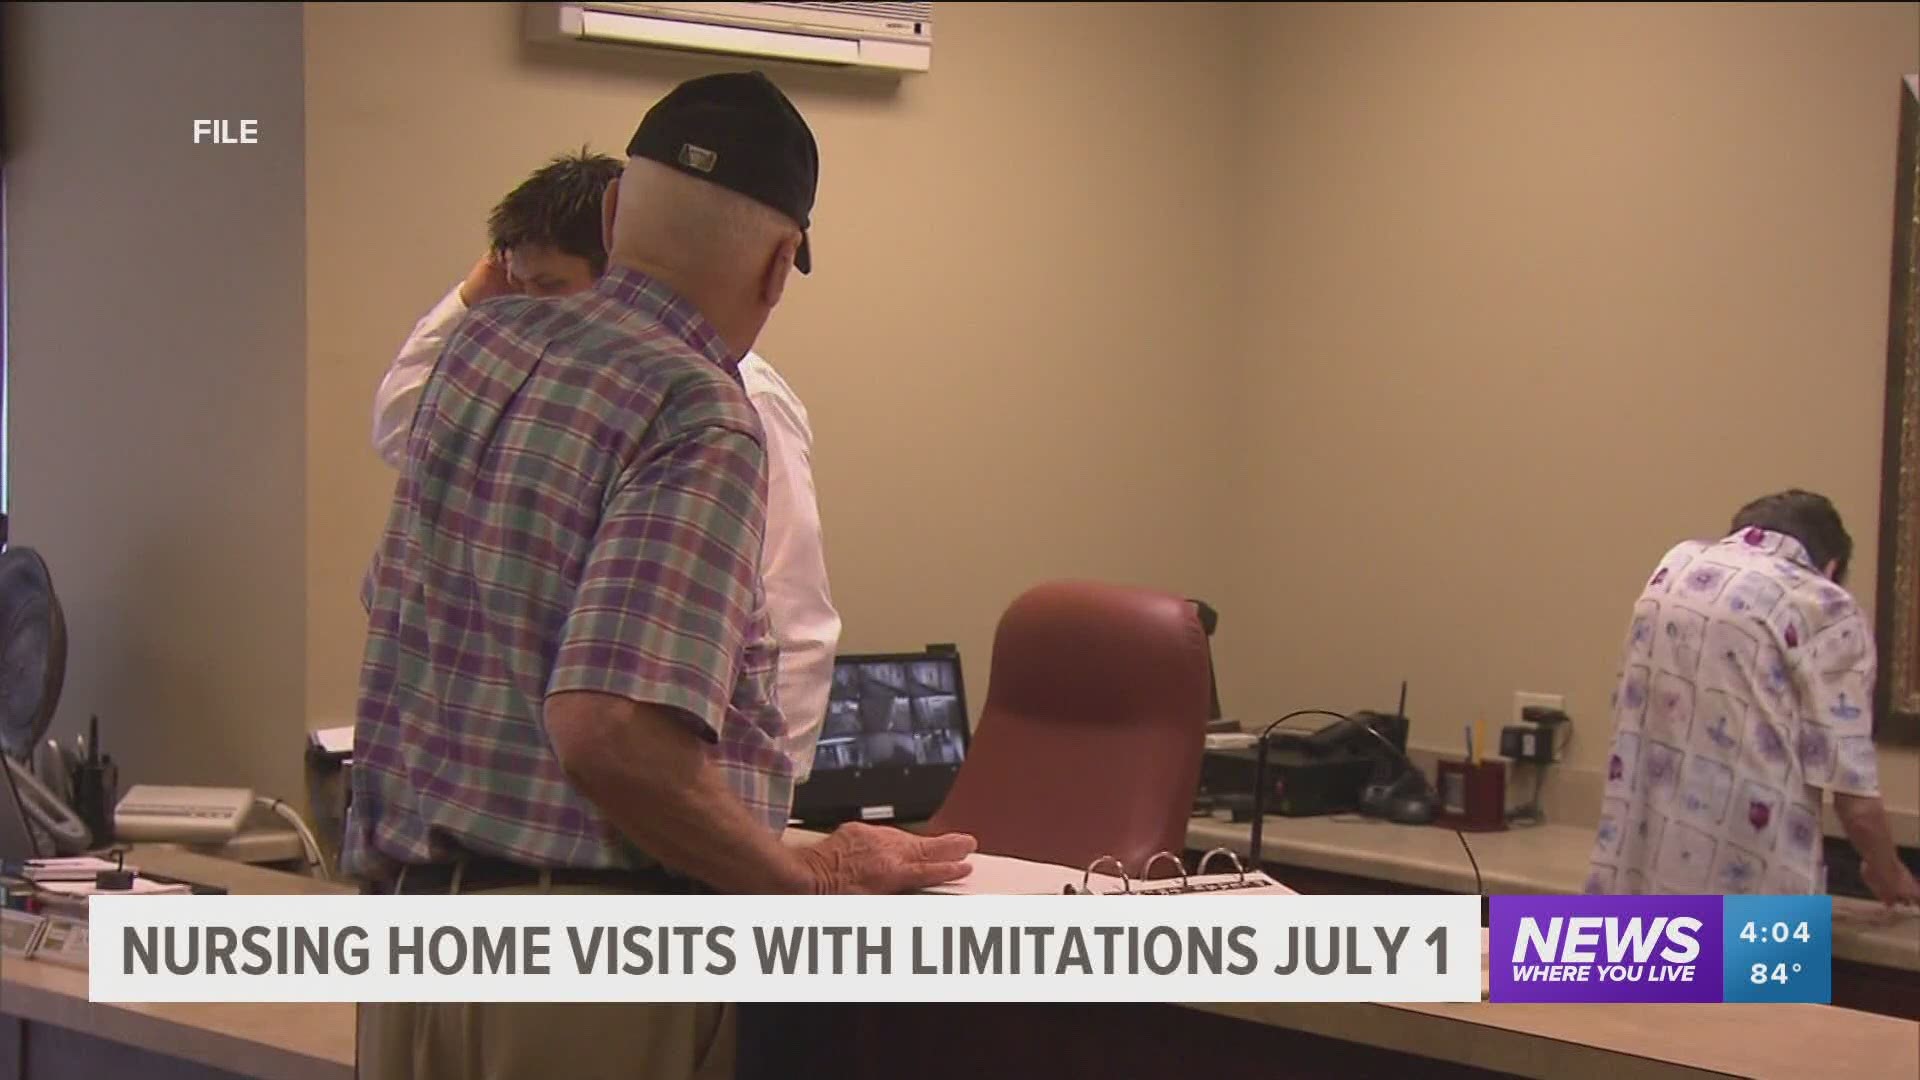 Nursing home visits can resume July 1 with limitations